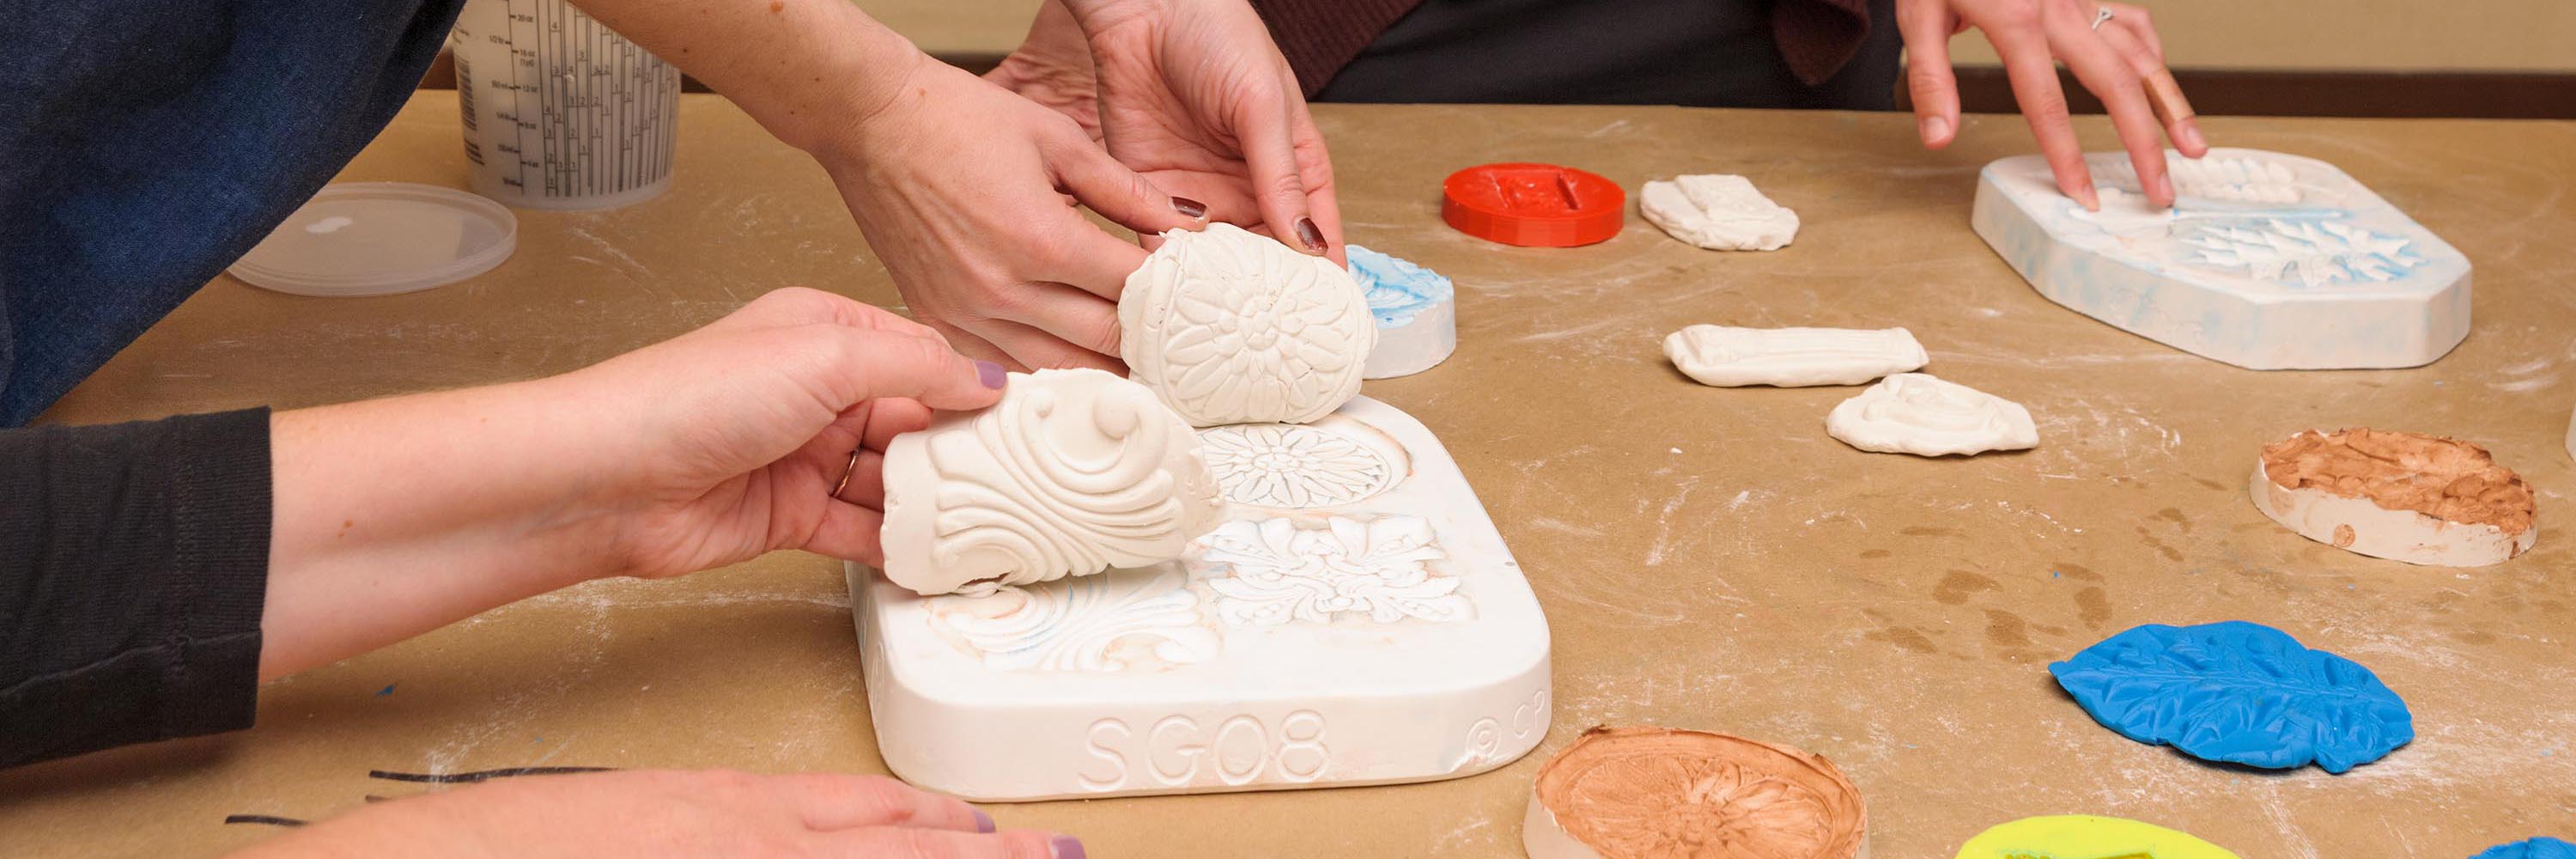 Hands press clay into plaster impressions, copying the relief patterns